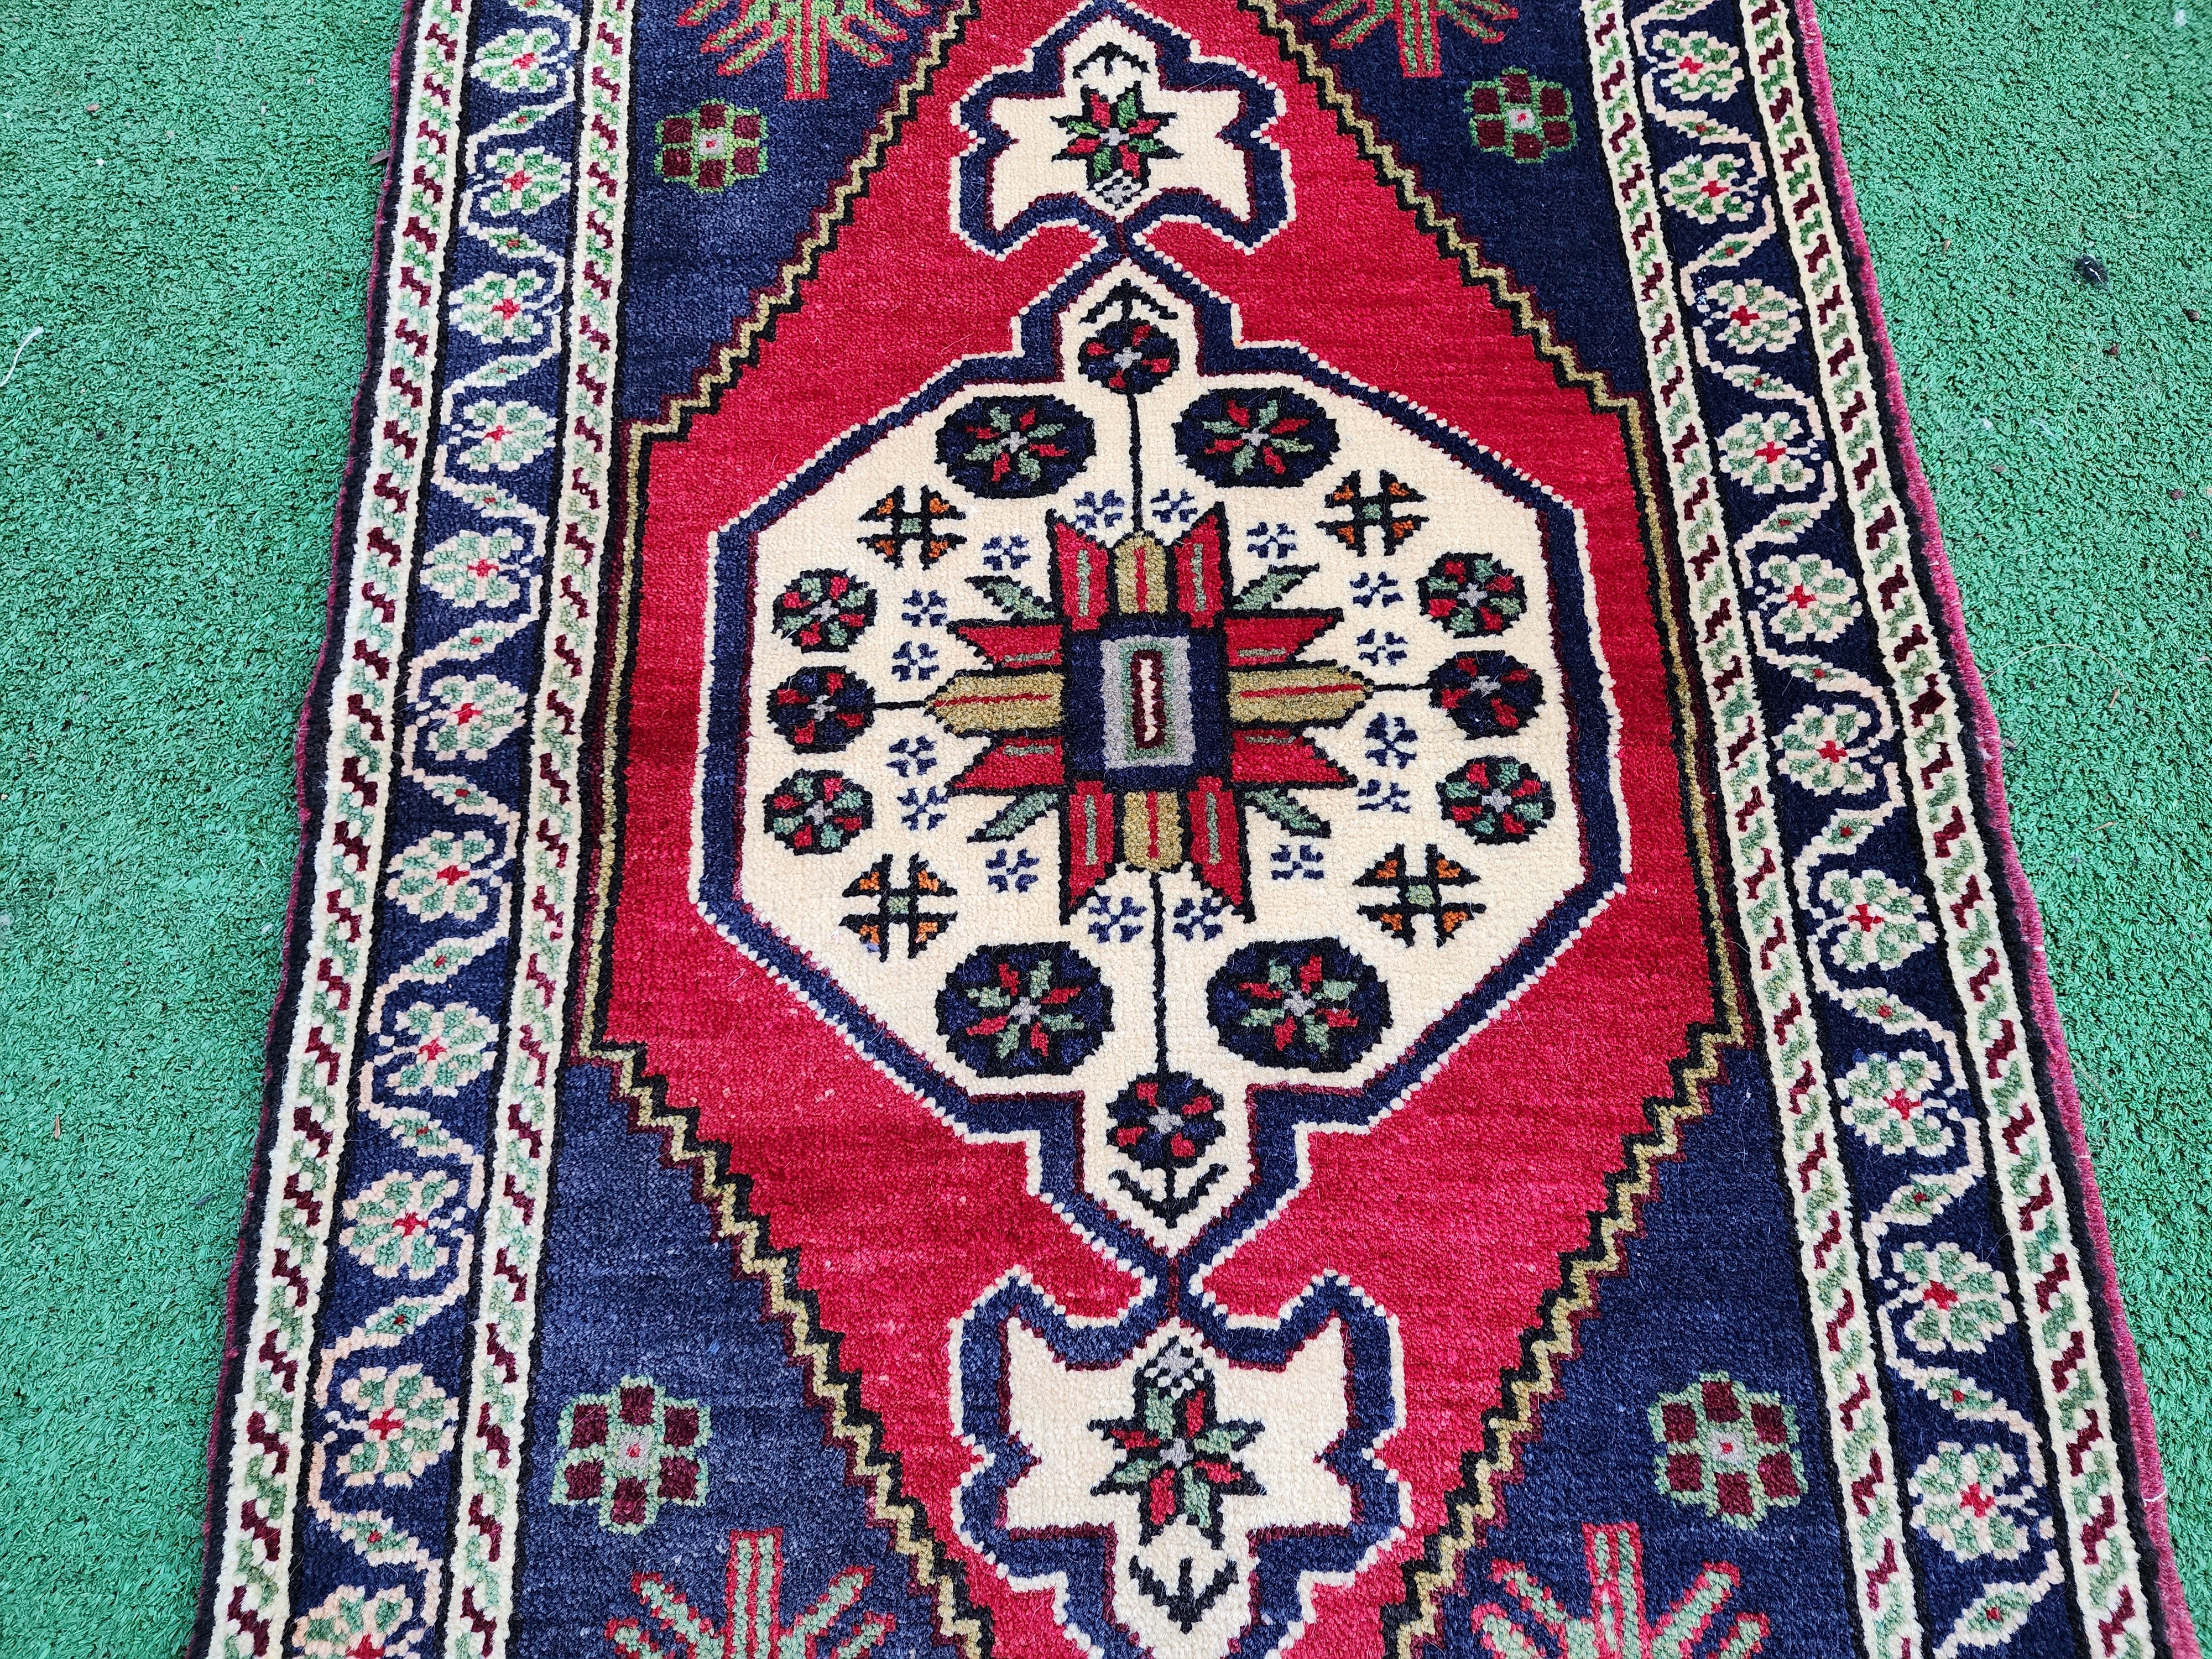 Red Blue Small Turkish Rug 3 ft 5 in x 1 ft 7 in Vintage Rug for Entry, Kitchen, Hallway or Bedroom